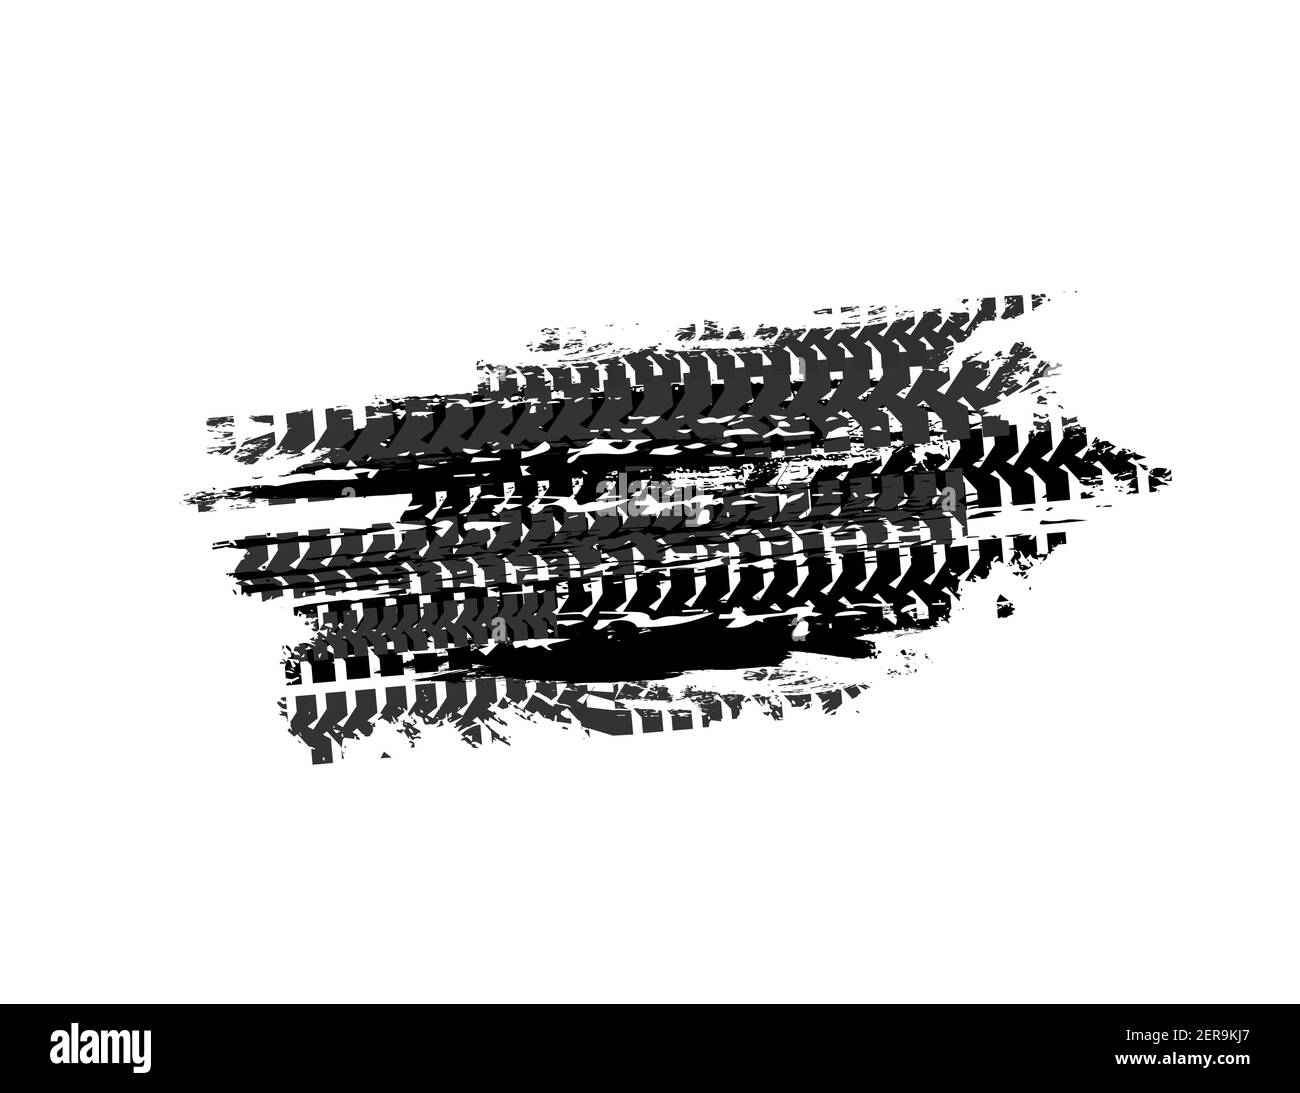 Tire marks or tyre tracks, skidding traces print, vector car wheels. Tire marks on road mud, bike or truck tyre tracks on street, grunge dirt scratche Stock Vector